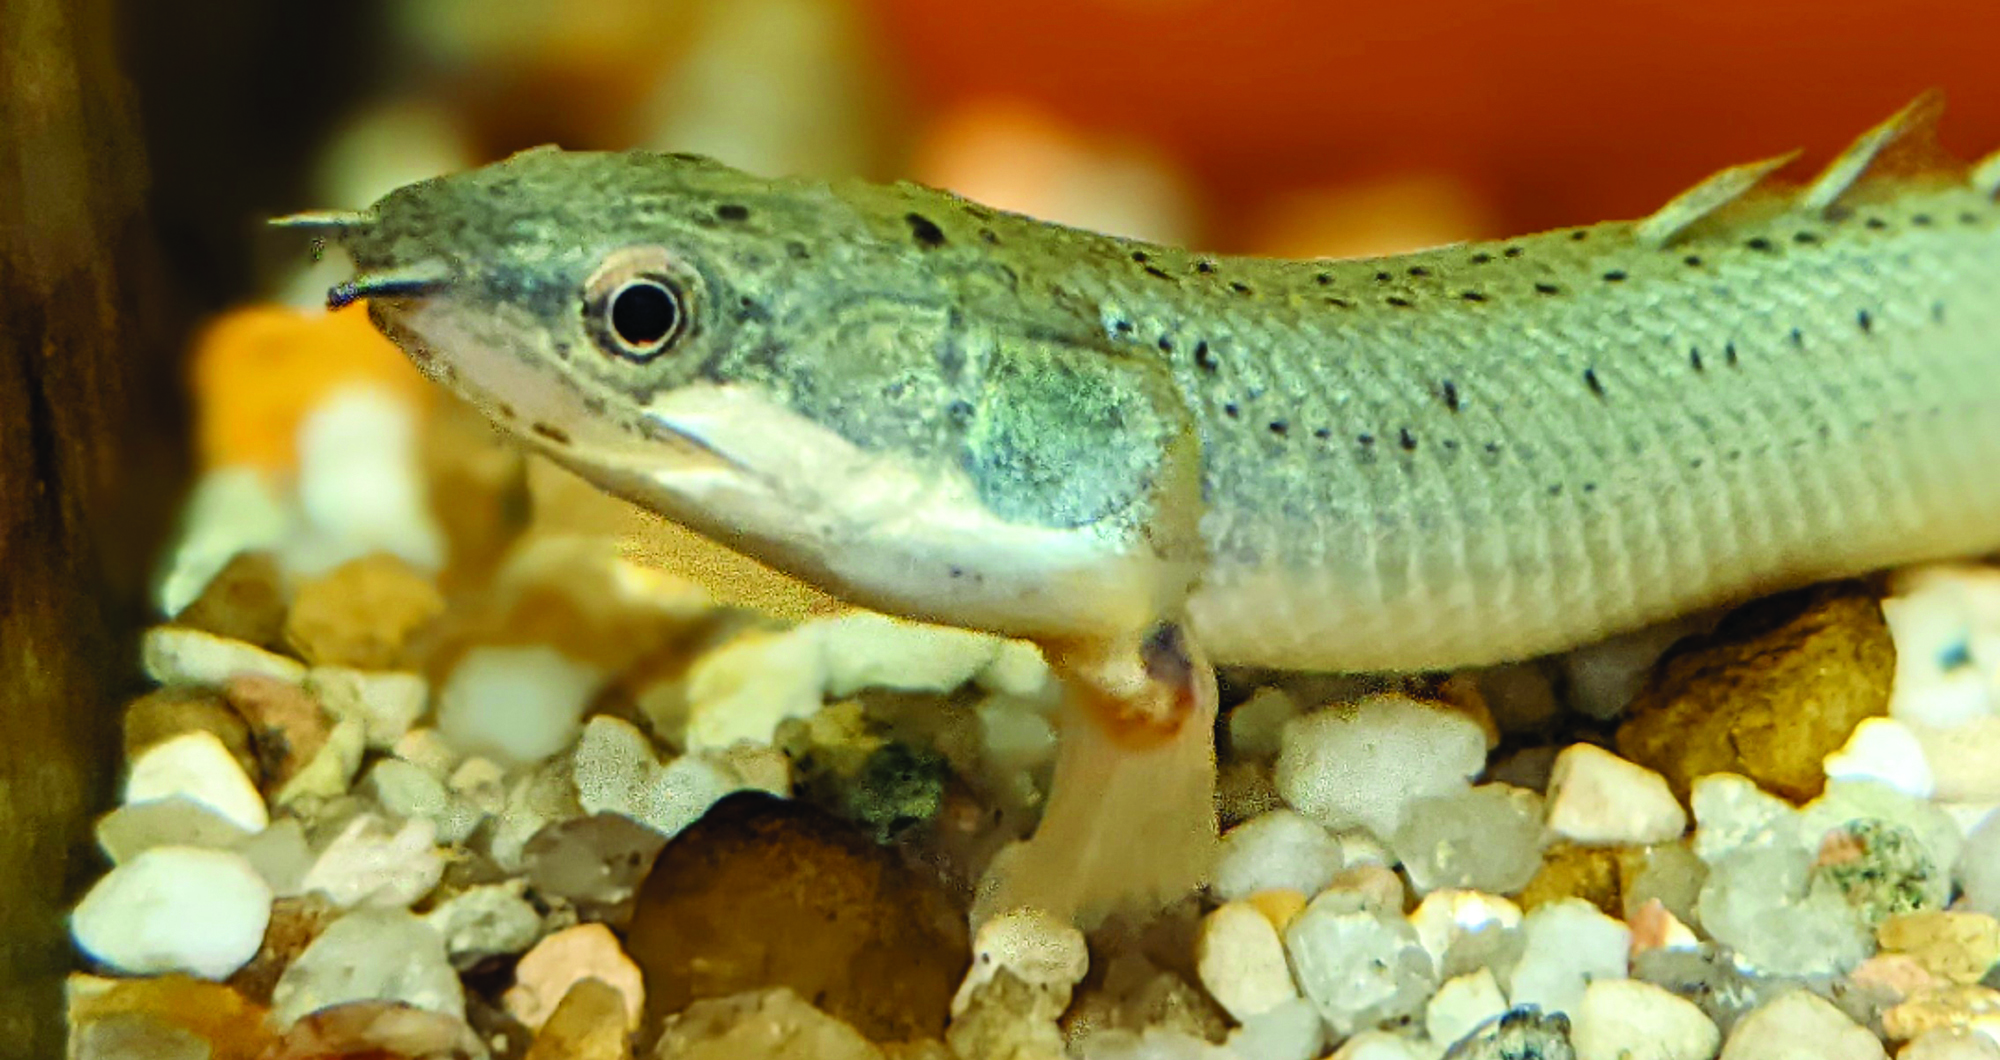 Polypterus in a tank with pebbles on the bottom